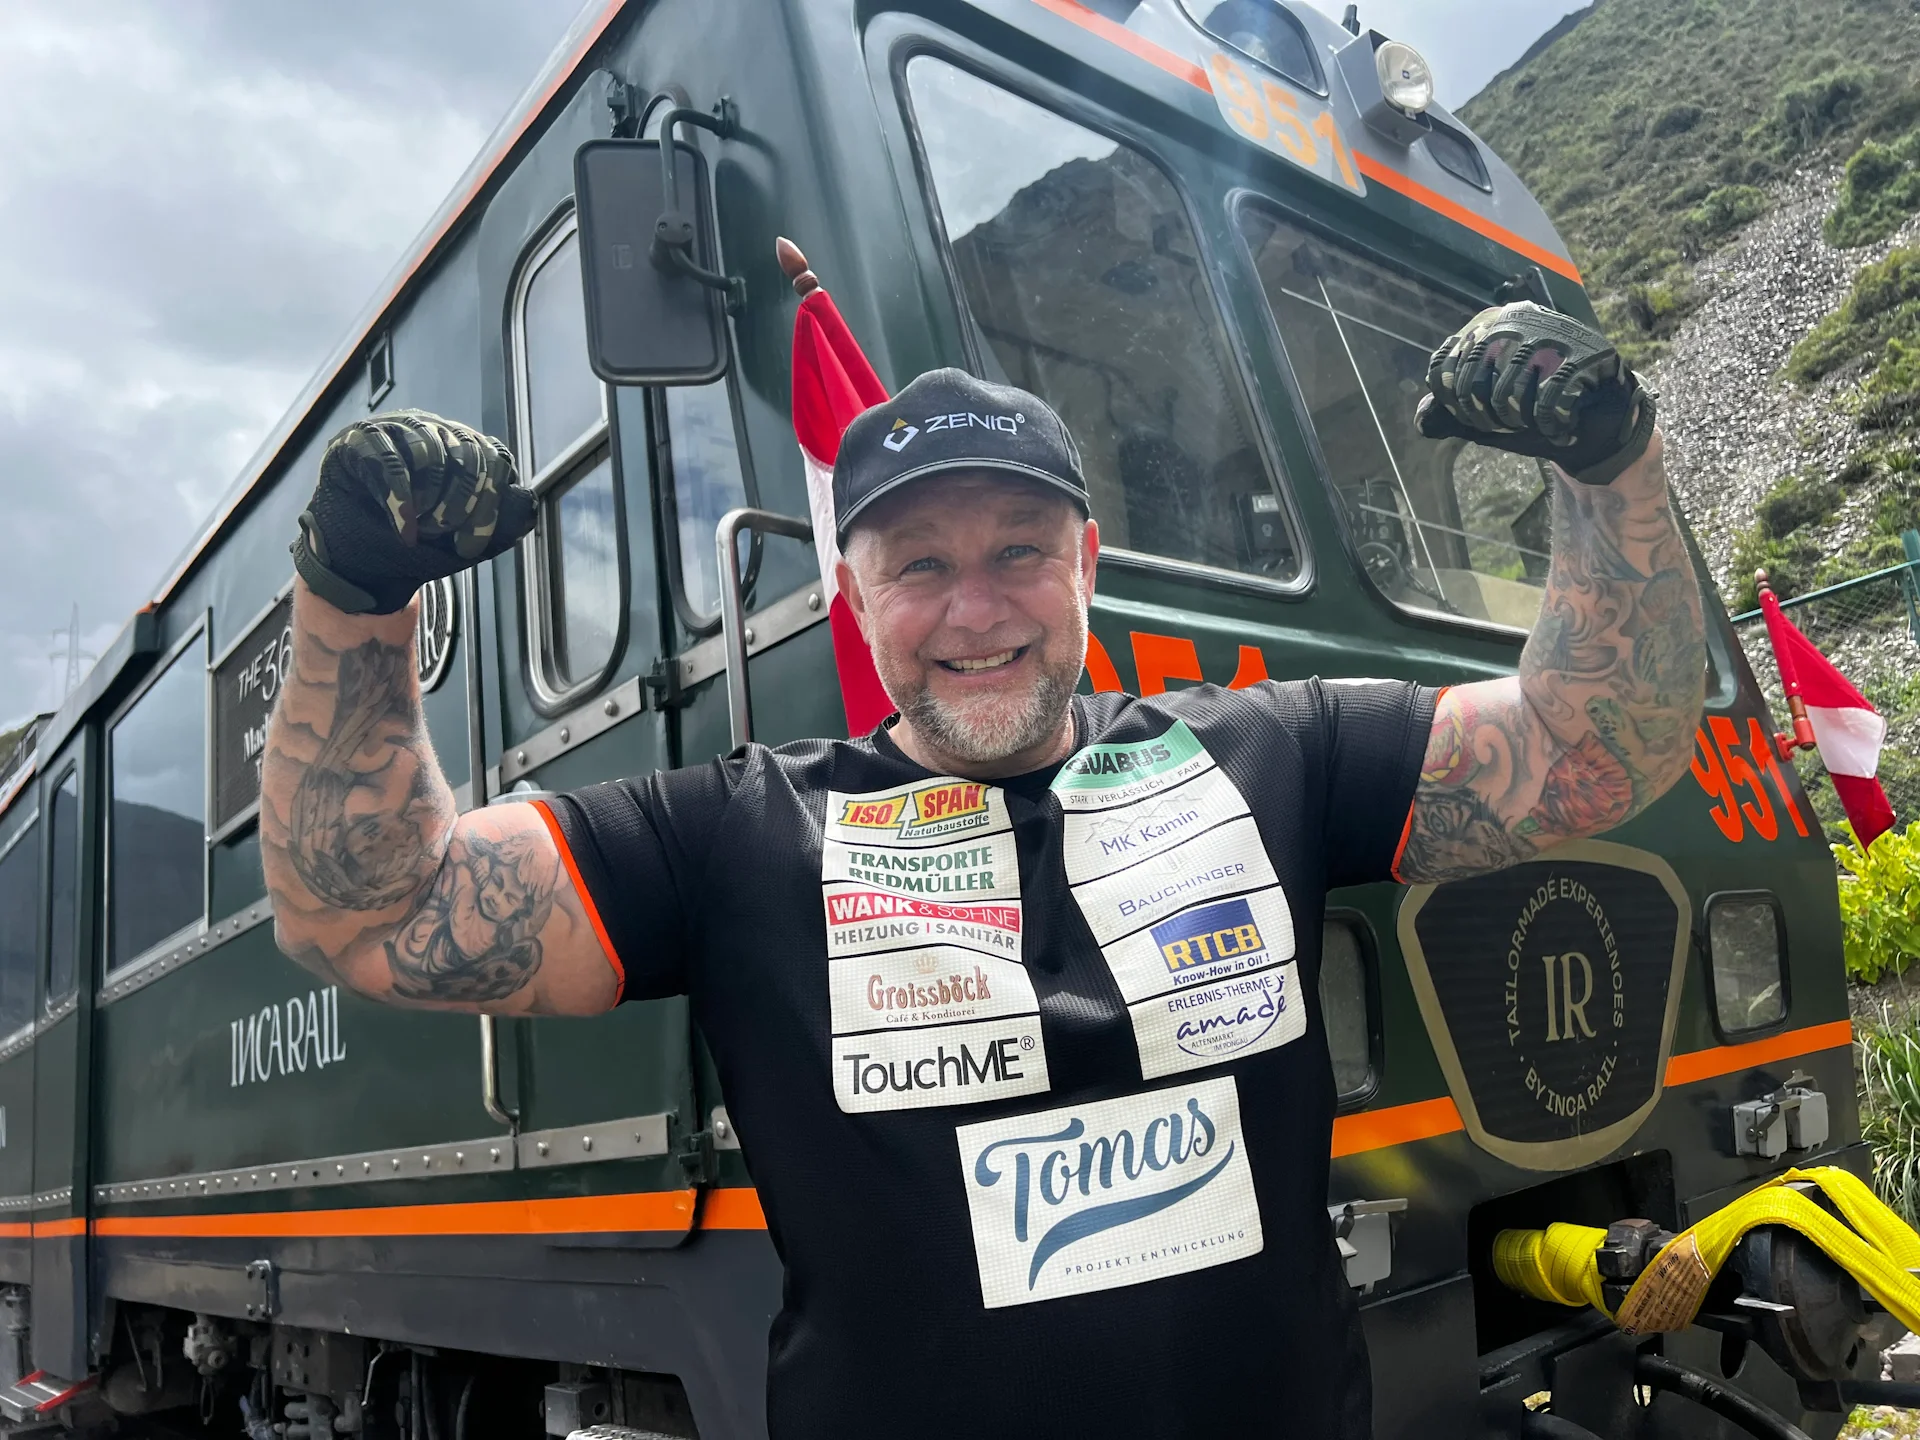 Austrian athlete achieves world record after pulling 81-ton train in Cusco TreXperience